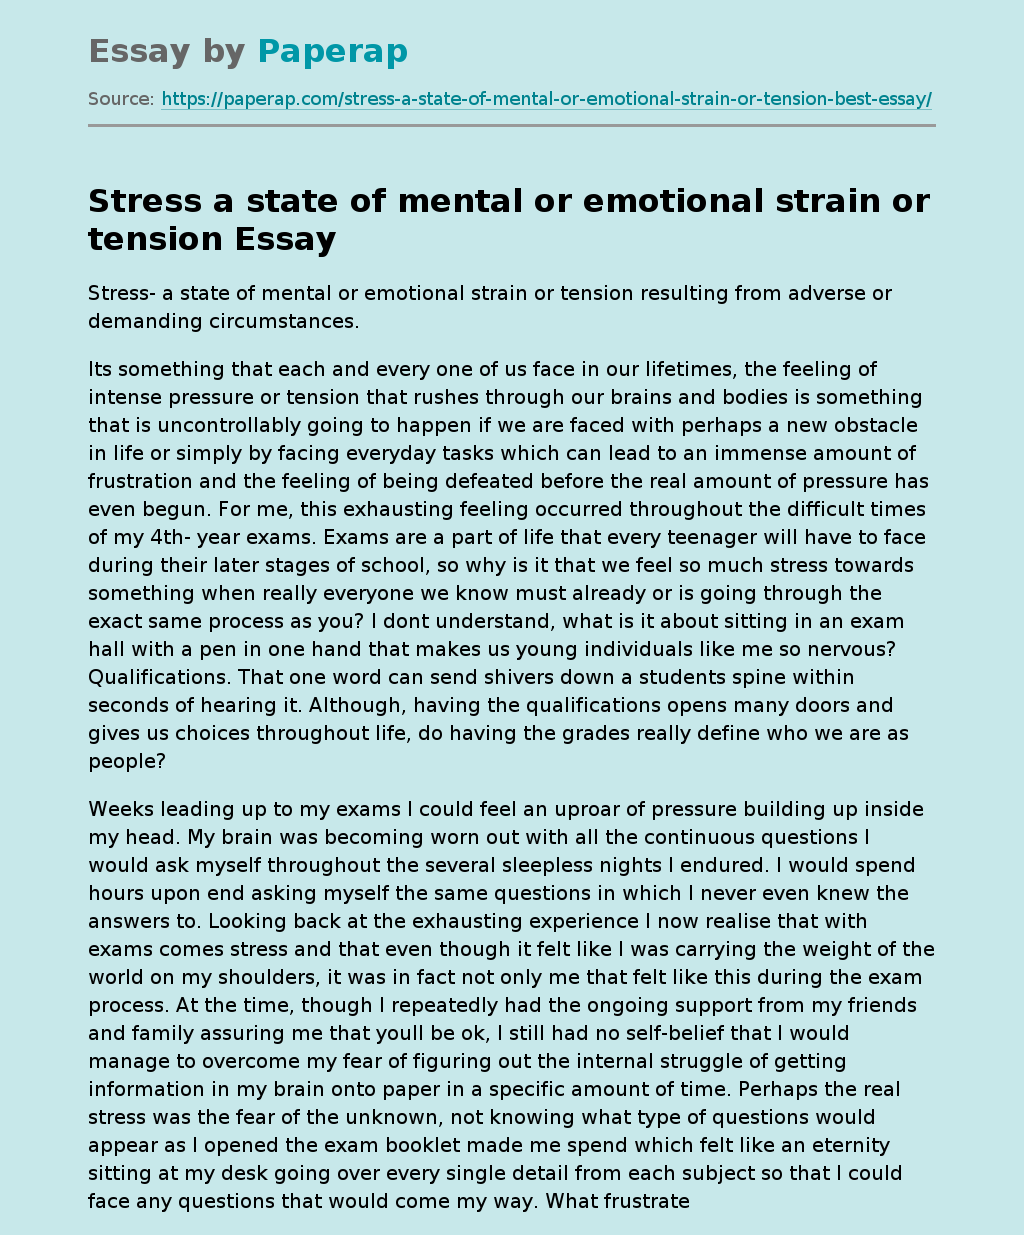 Stress a state of mental or emotional strain or tension